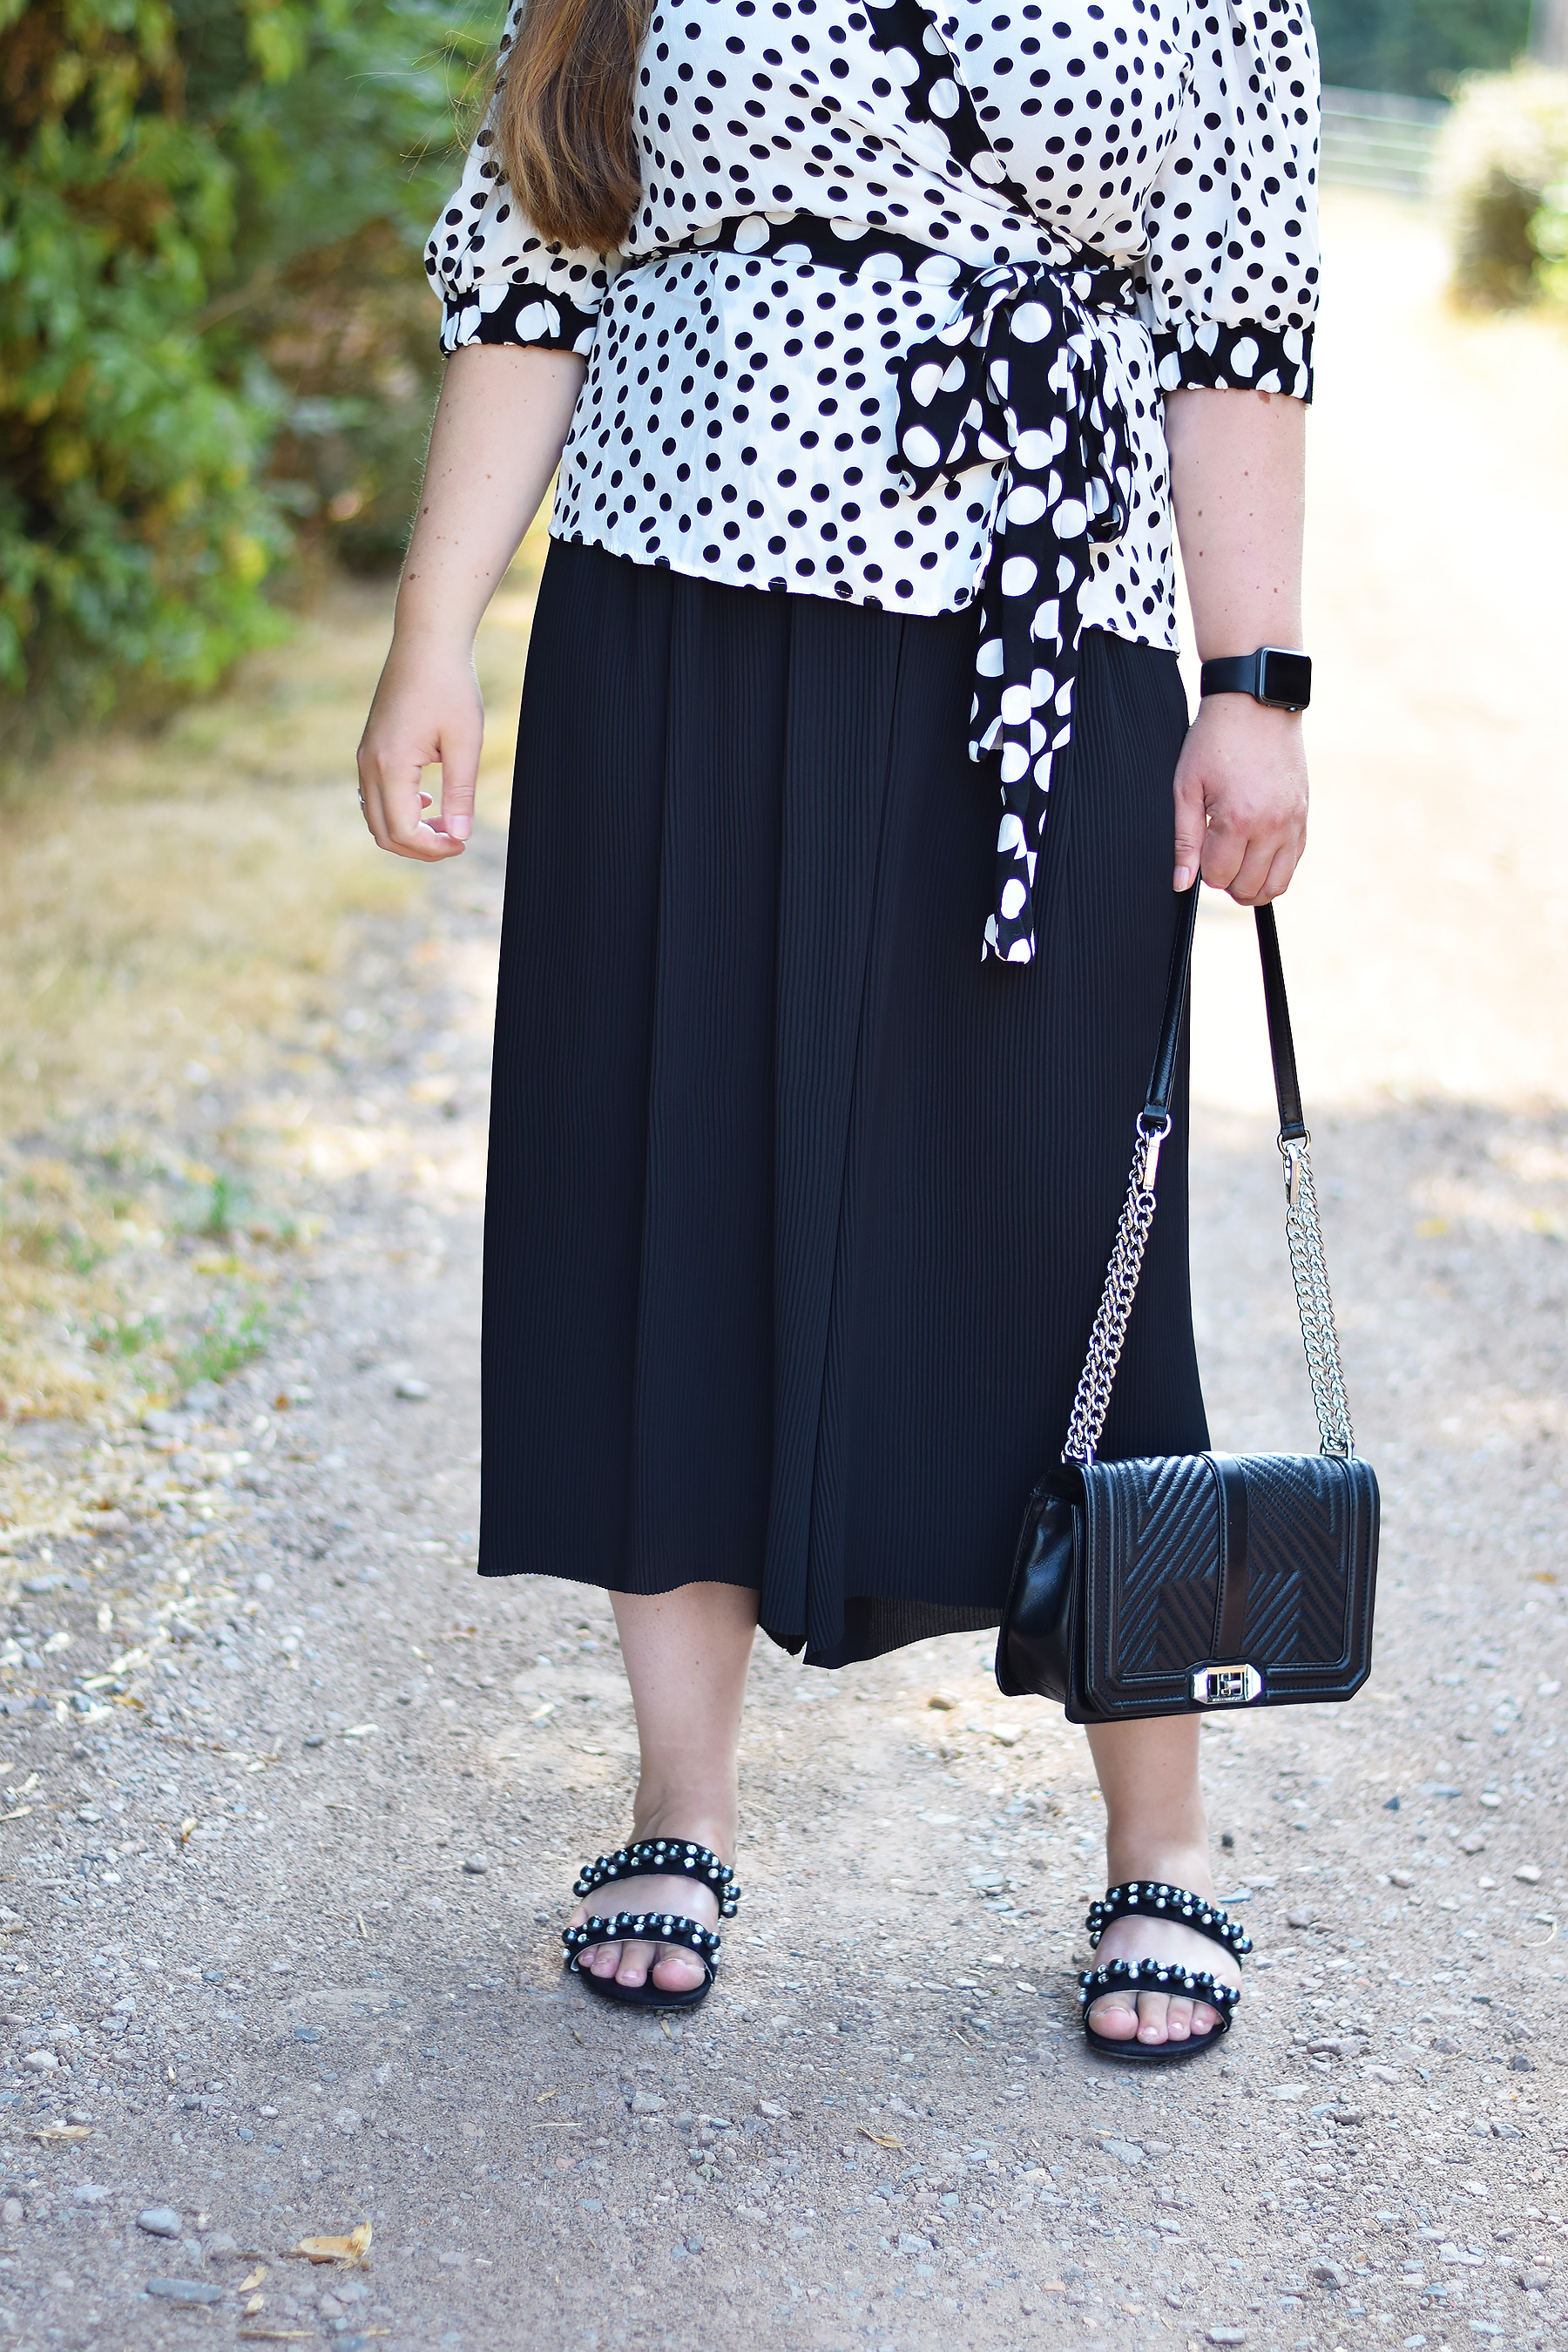 Zara spotty top and black culottes outfit